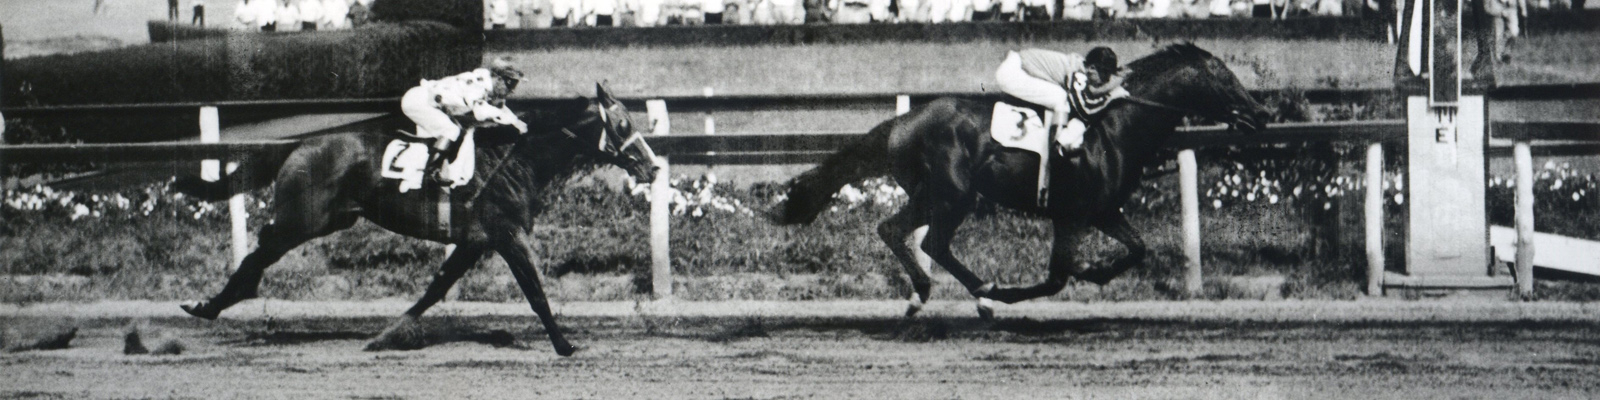 Tom Fool (Ted Atkinson up) winning the 1953 Brooklyn Handicap at Aqueduct (Keeneland Library Morgan Collection/Museum Collection)